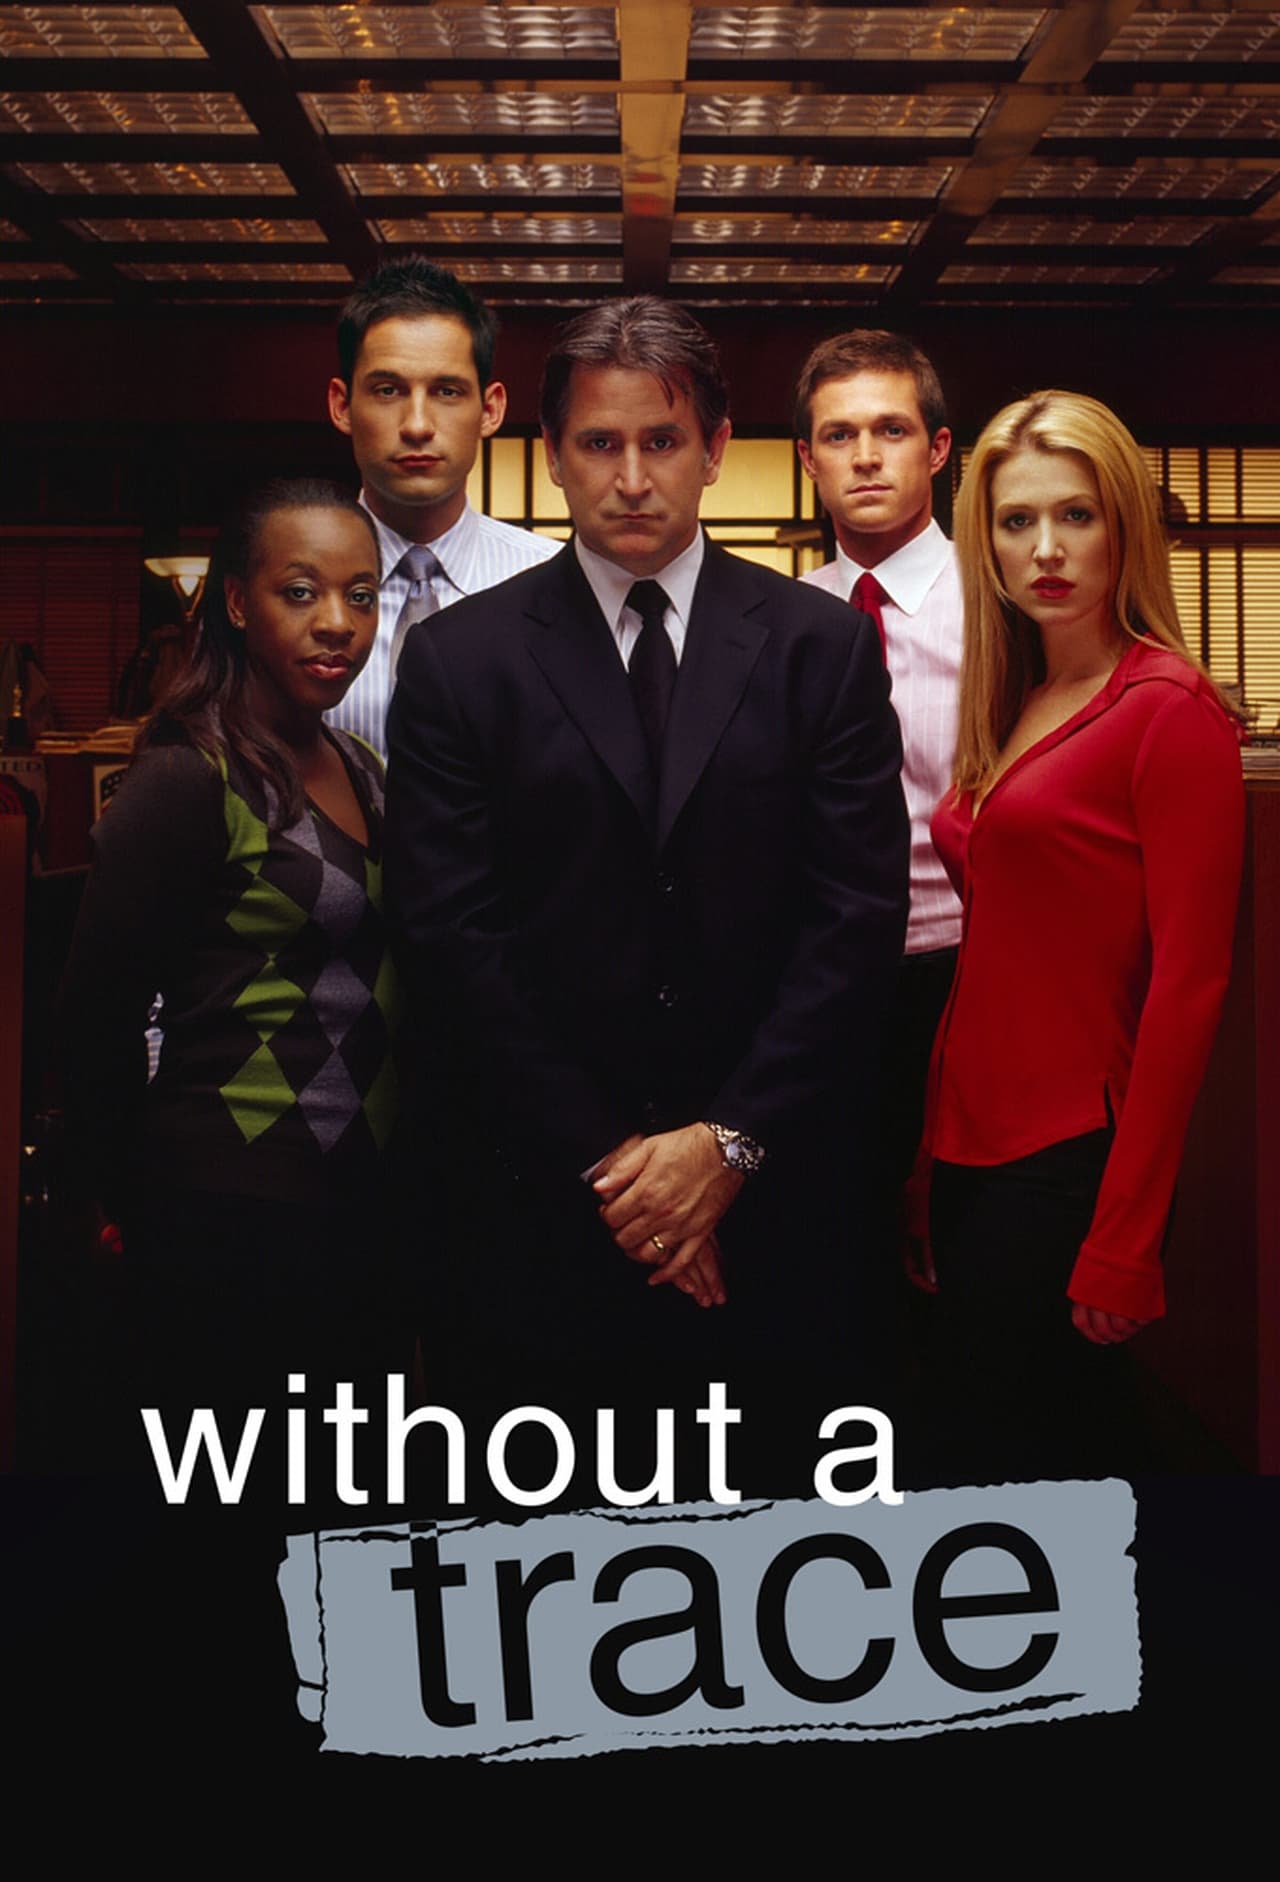 Without a Trace, Season 2 release date, trailers, cast, synopsis and